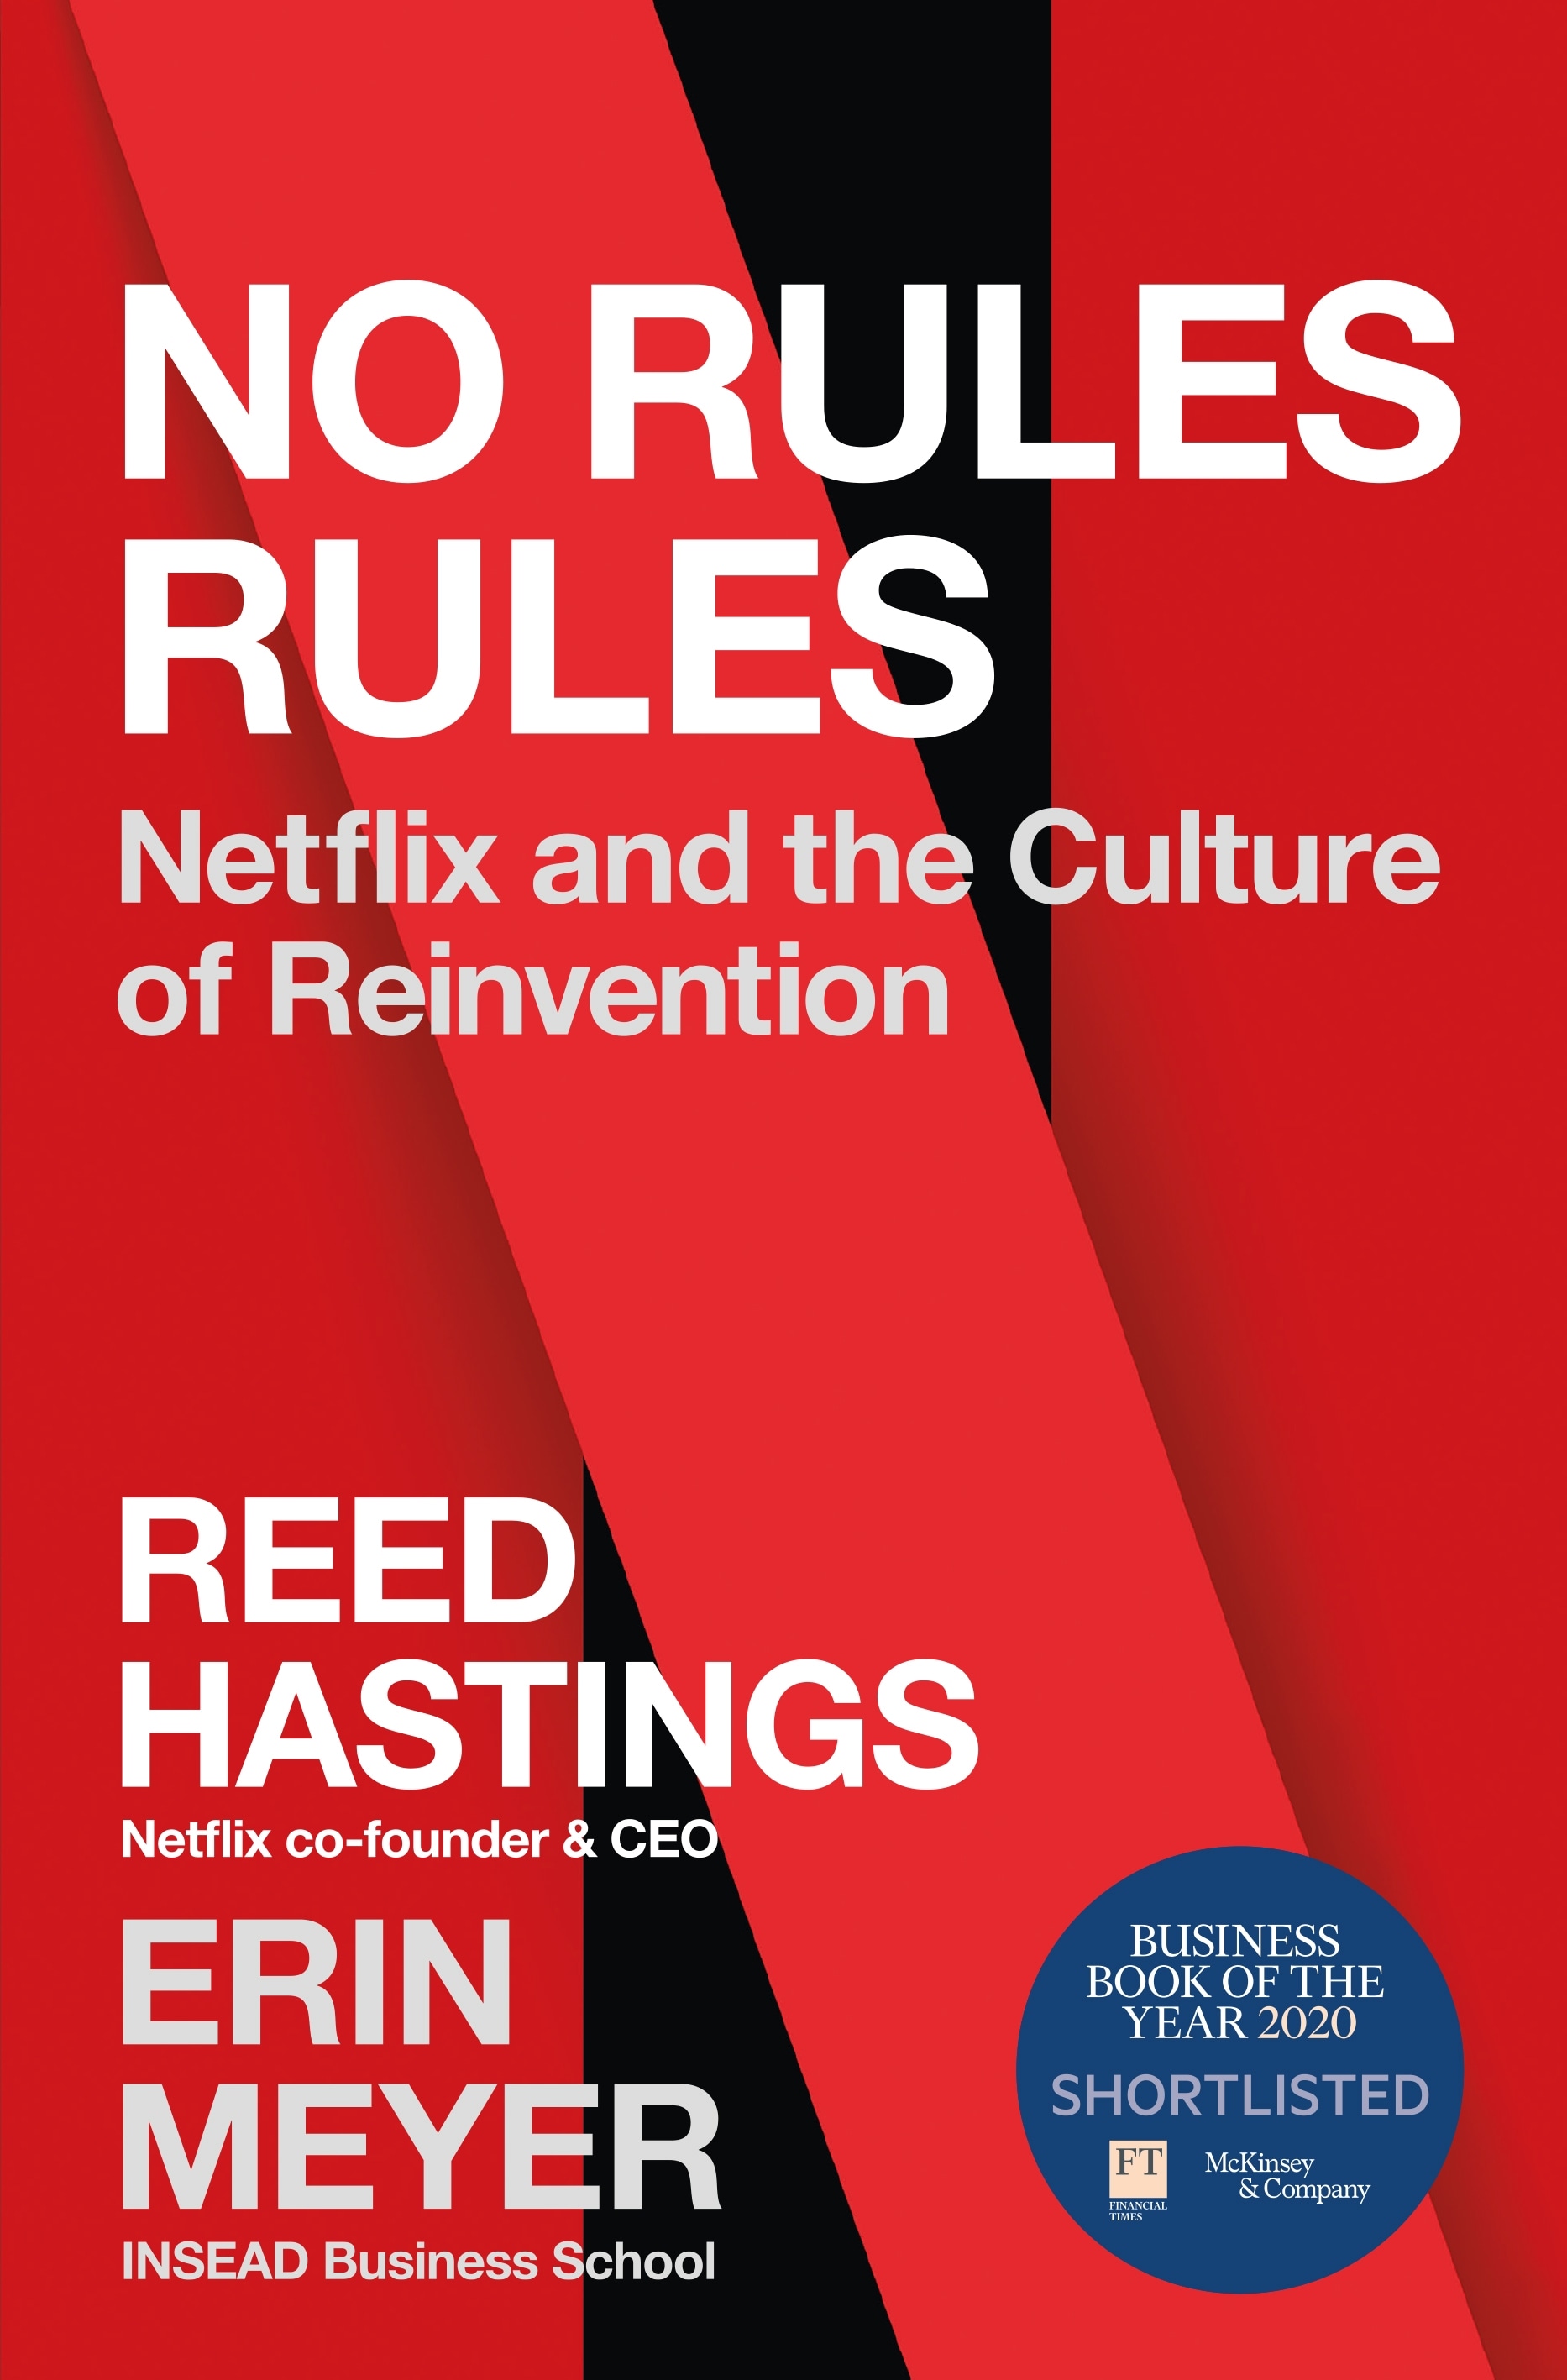 Book “No Rules Rules” by Reed Hastings, Erin Meyer — September 8, 2020